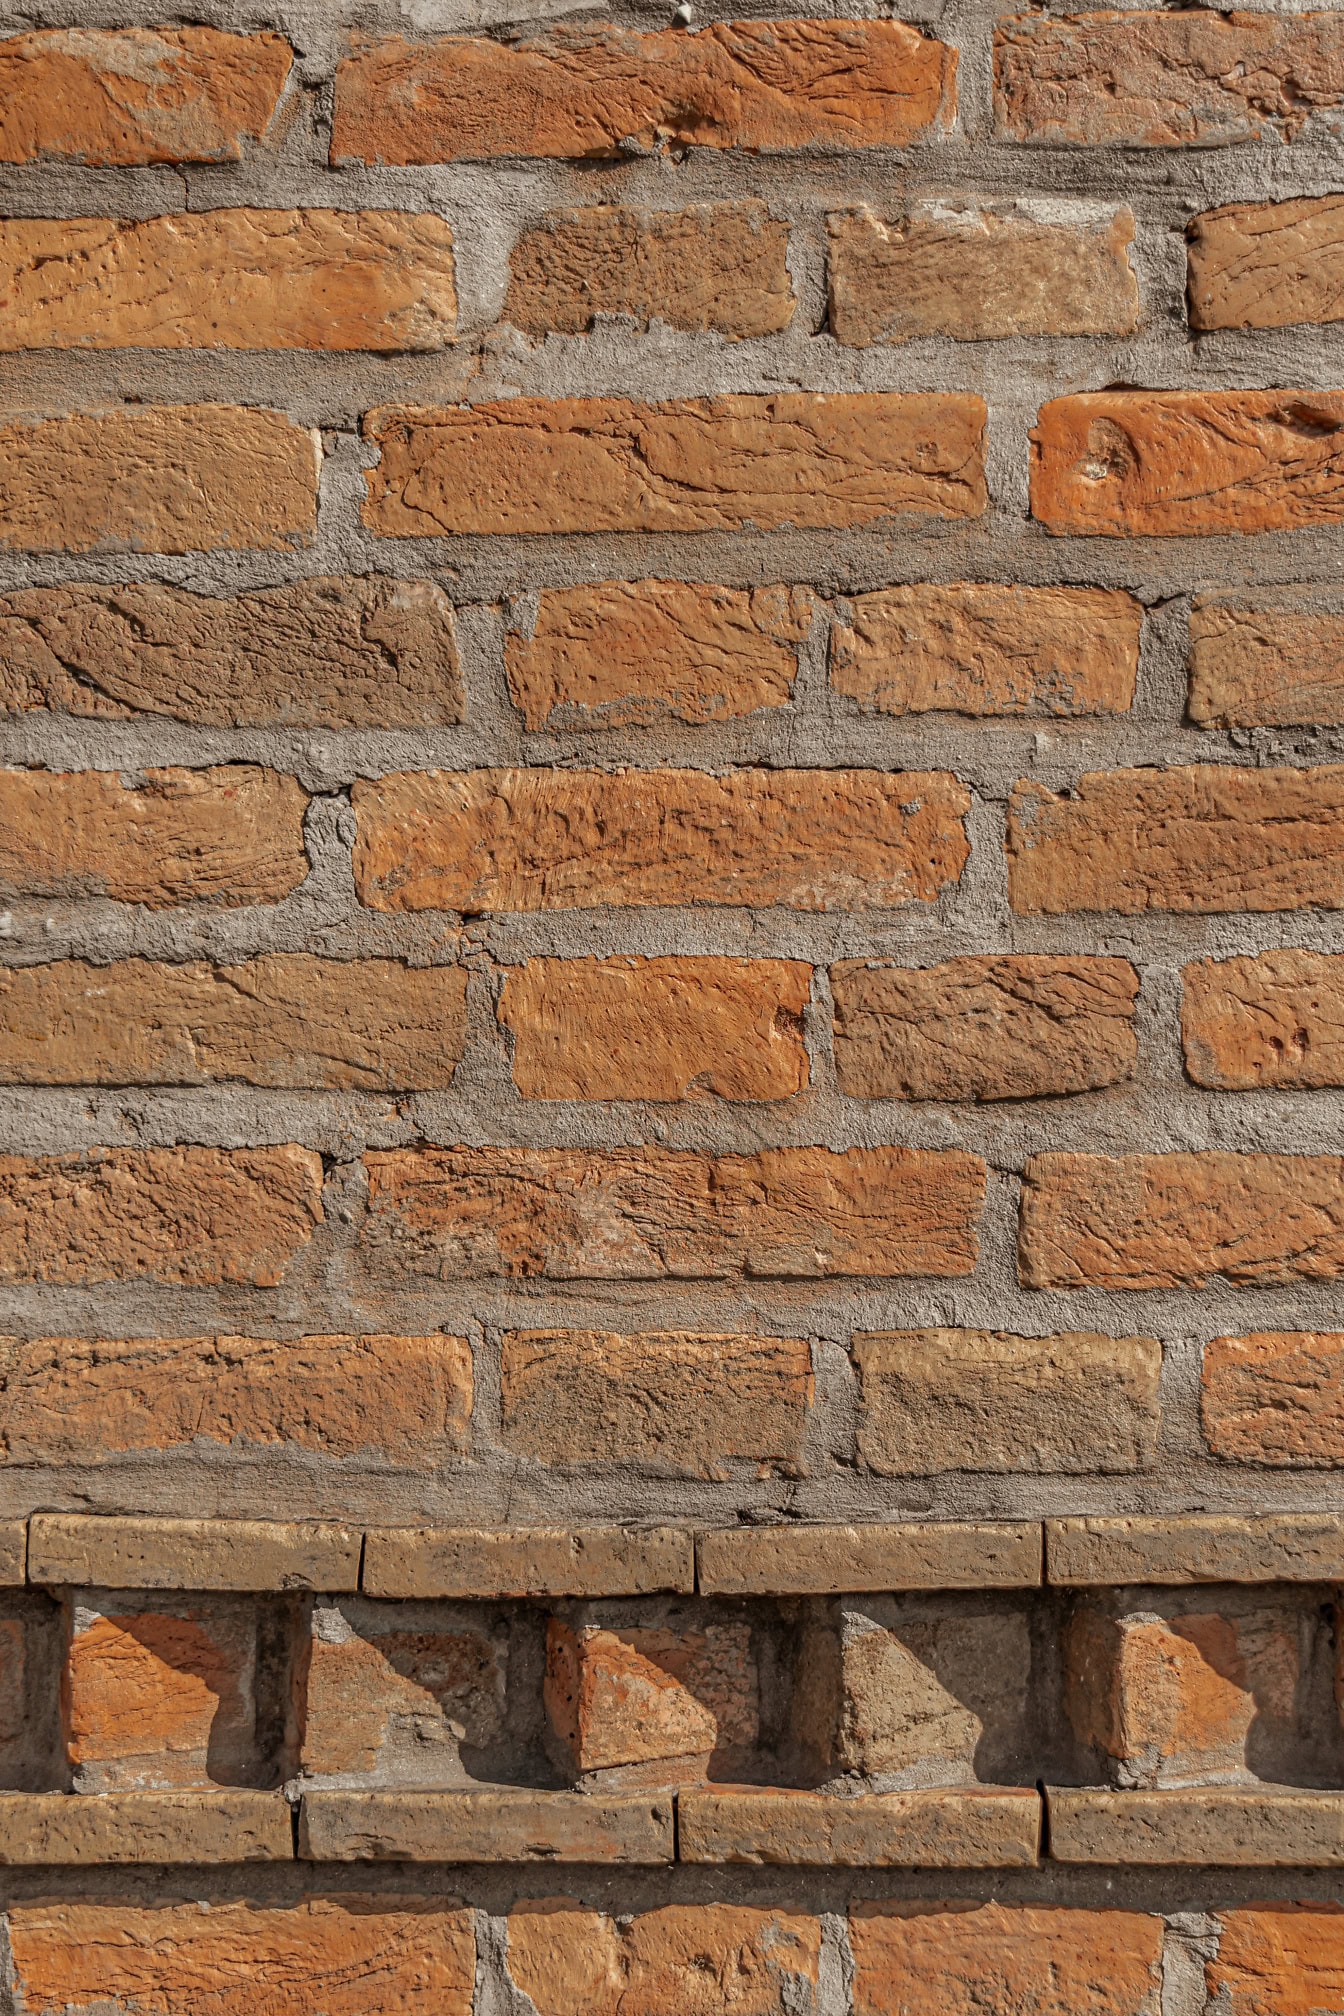 Texture of brick wall with thick cement layer between large format bricks and with horizontal decorative border at bottom